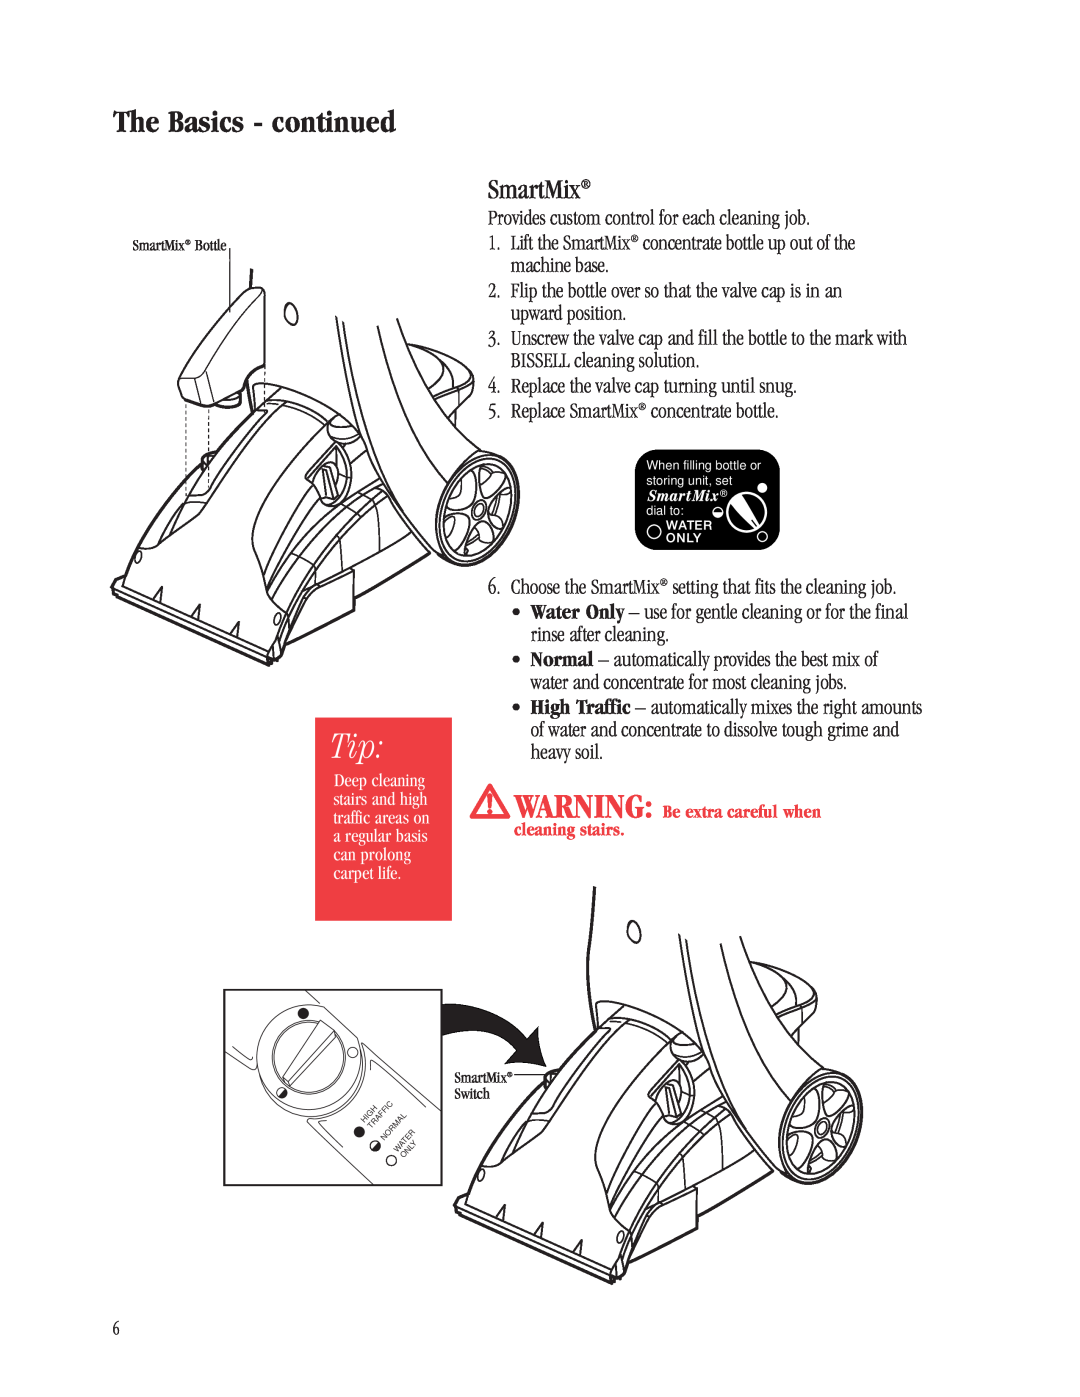 Bissell 1698 warranty The Basics - continued, SmartMix 